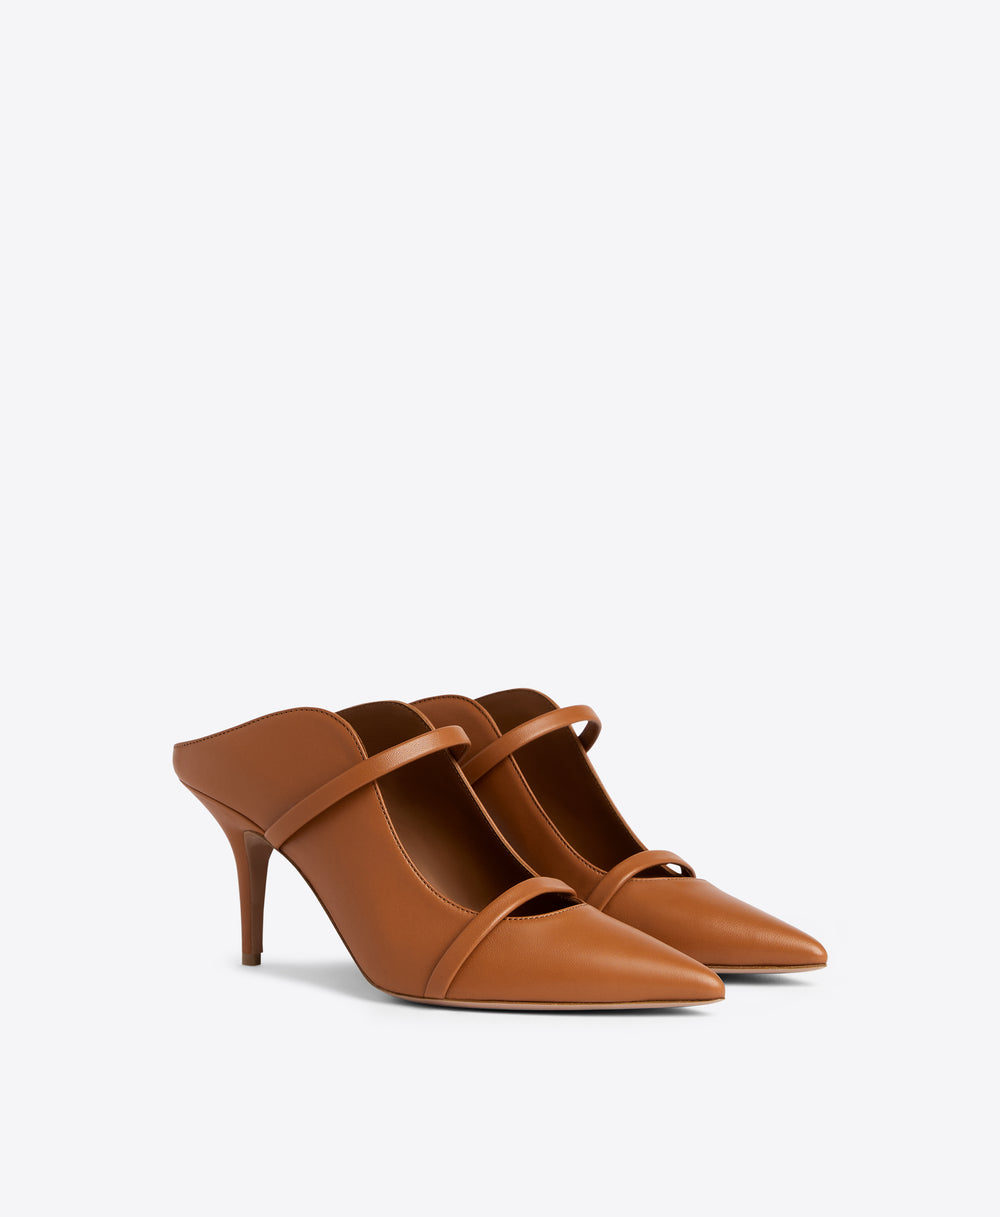 Malone Souliers Maureen 70mm Brown Leather Heeled Mules